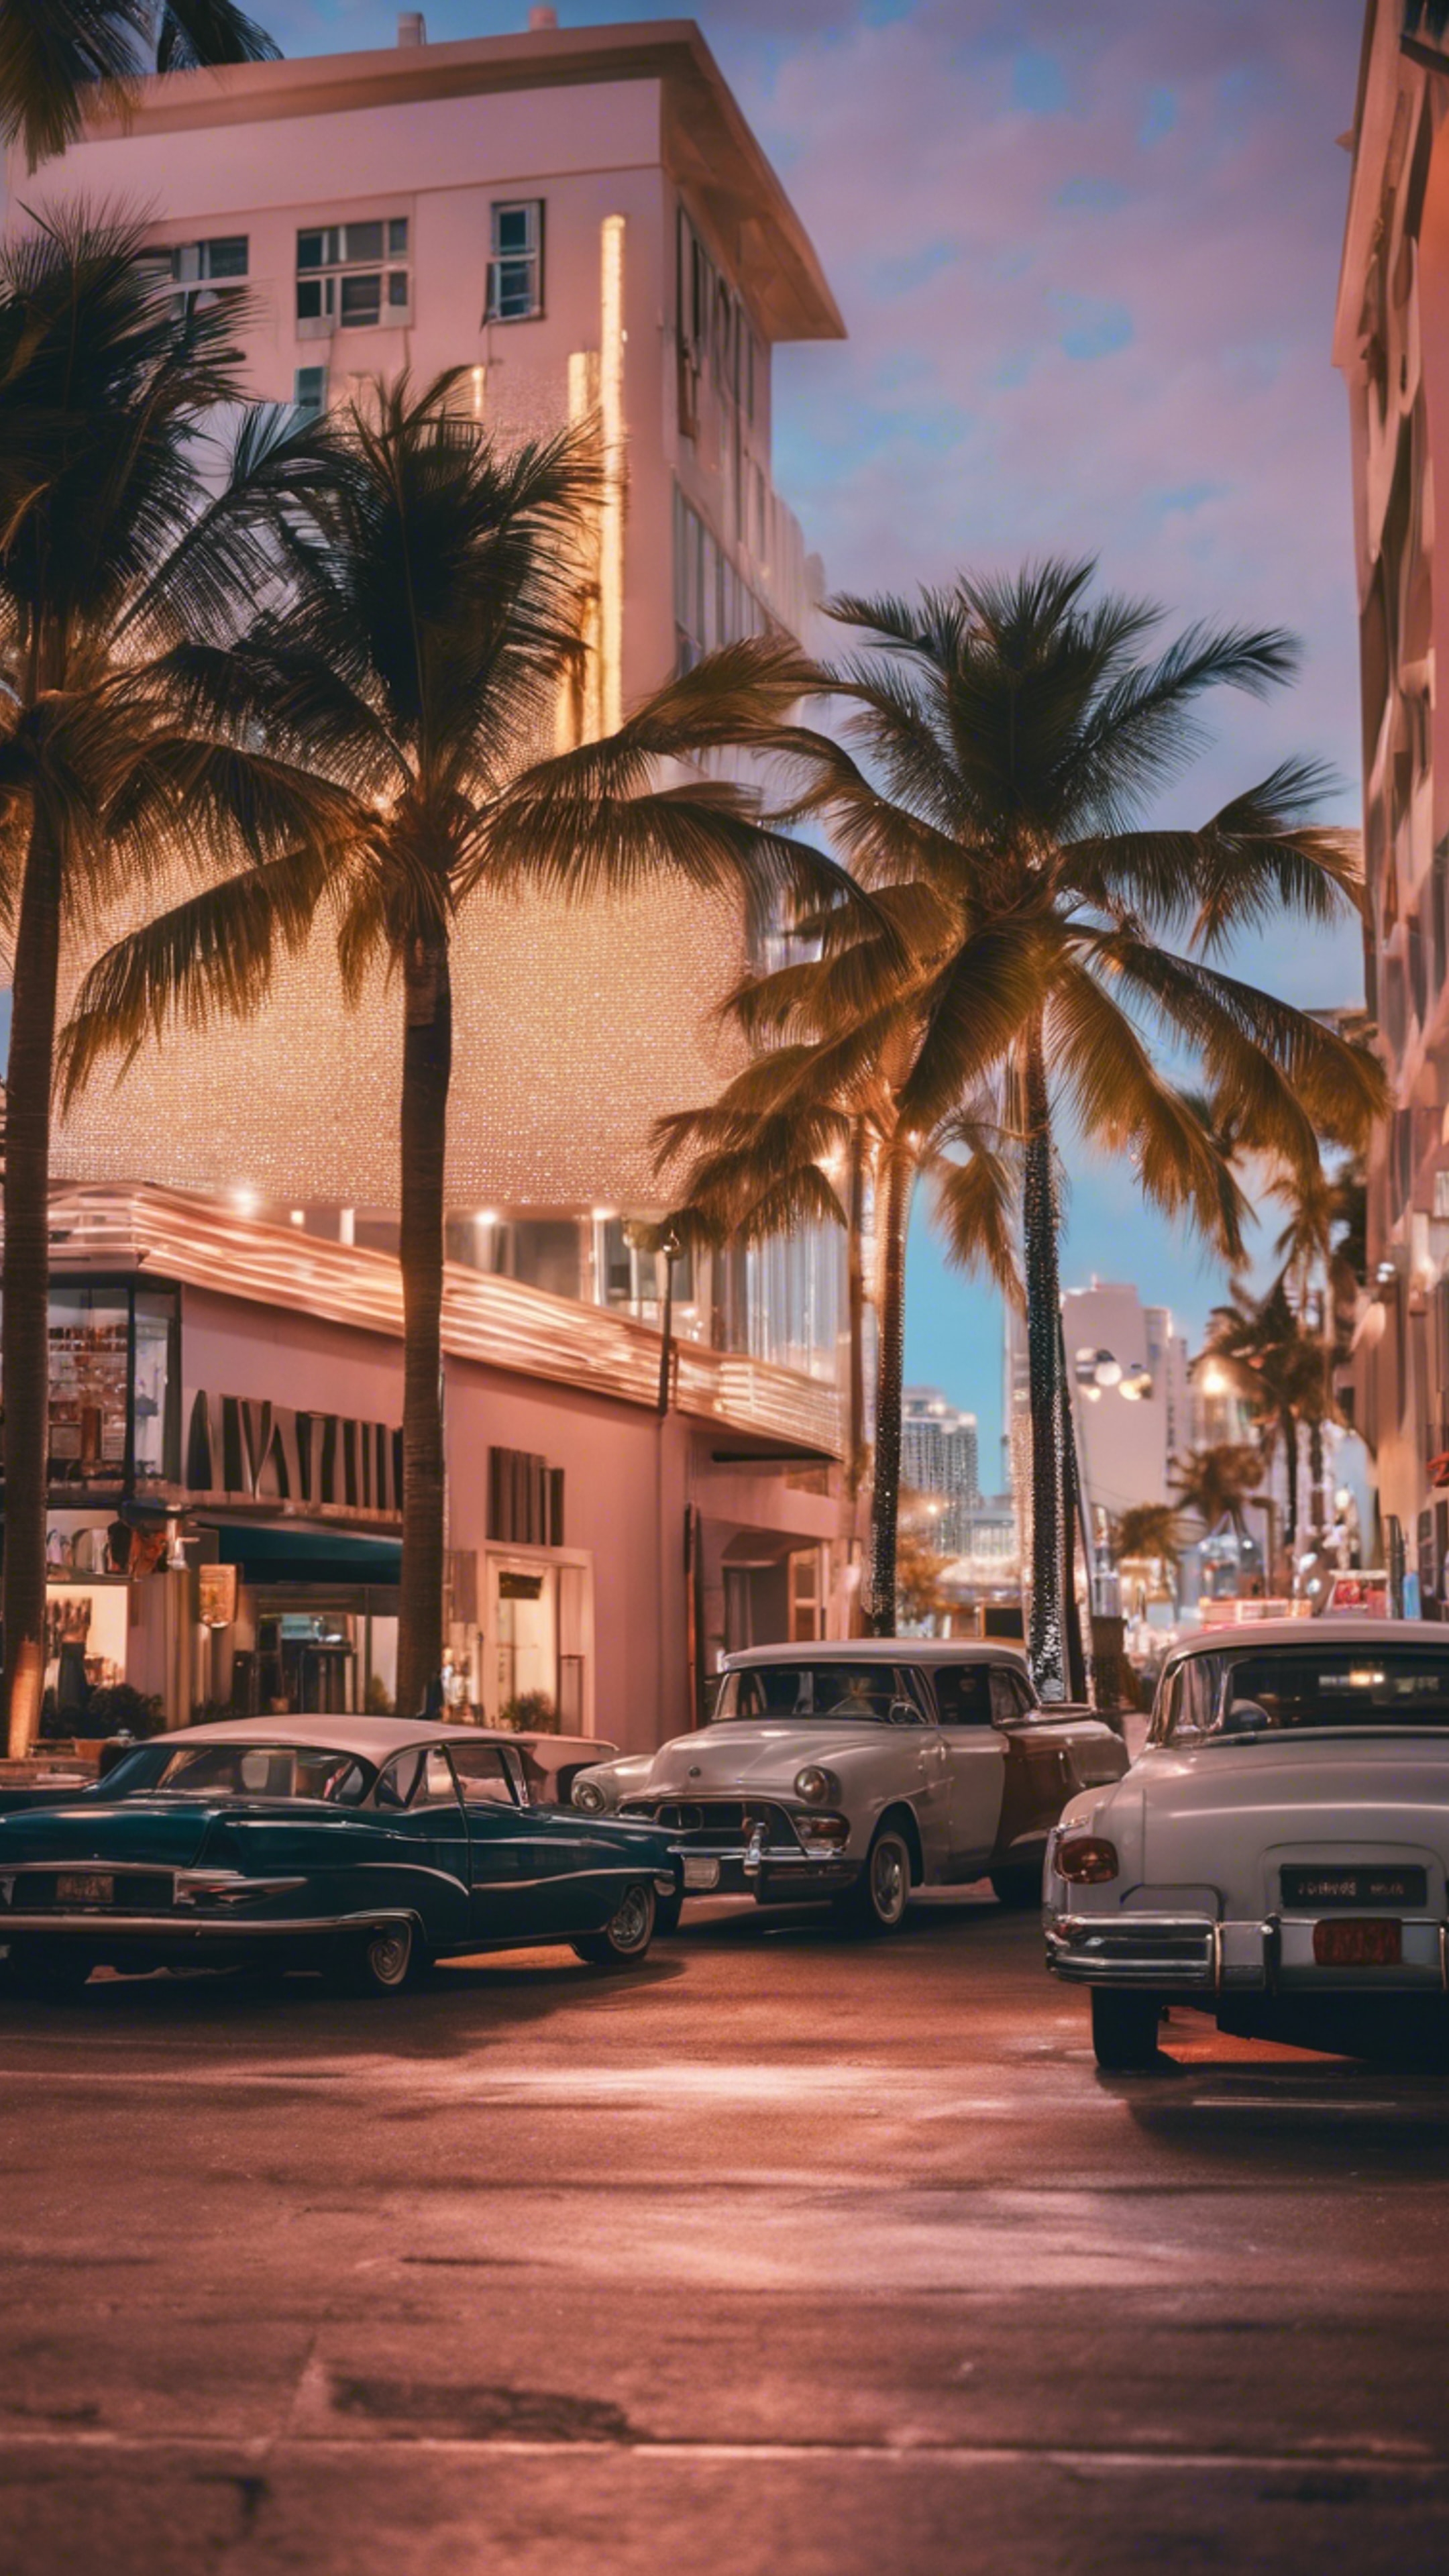 A bustling Miami Beach street scene, with art deco buildings and palm trees, vibrant nightlife atmosphere. کاغذ دیواری[c899e7f744884bb387cd]